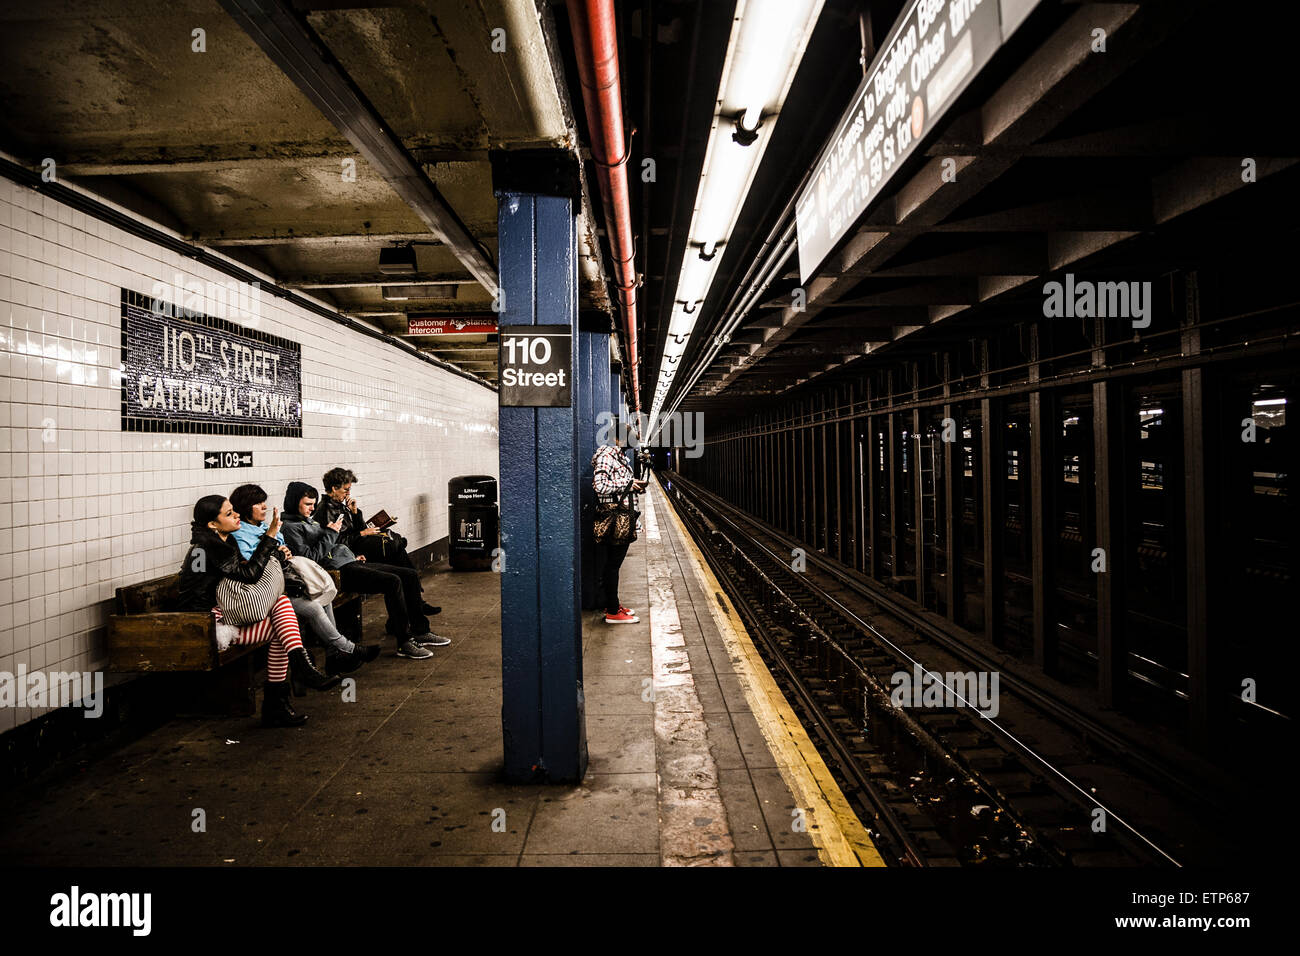 Commuters waiting on platform on the NYC Subway Stock Photo